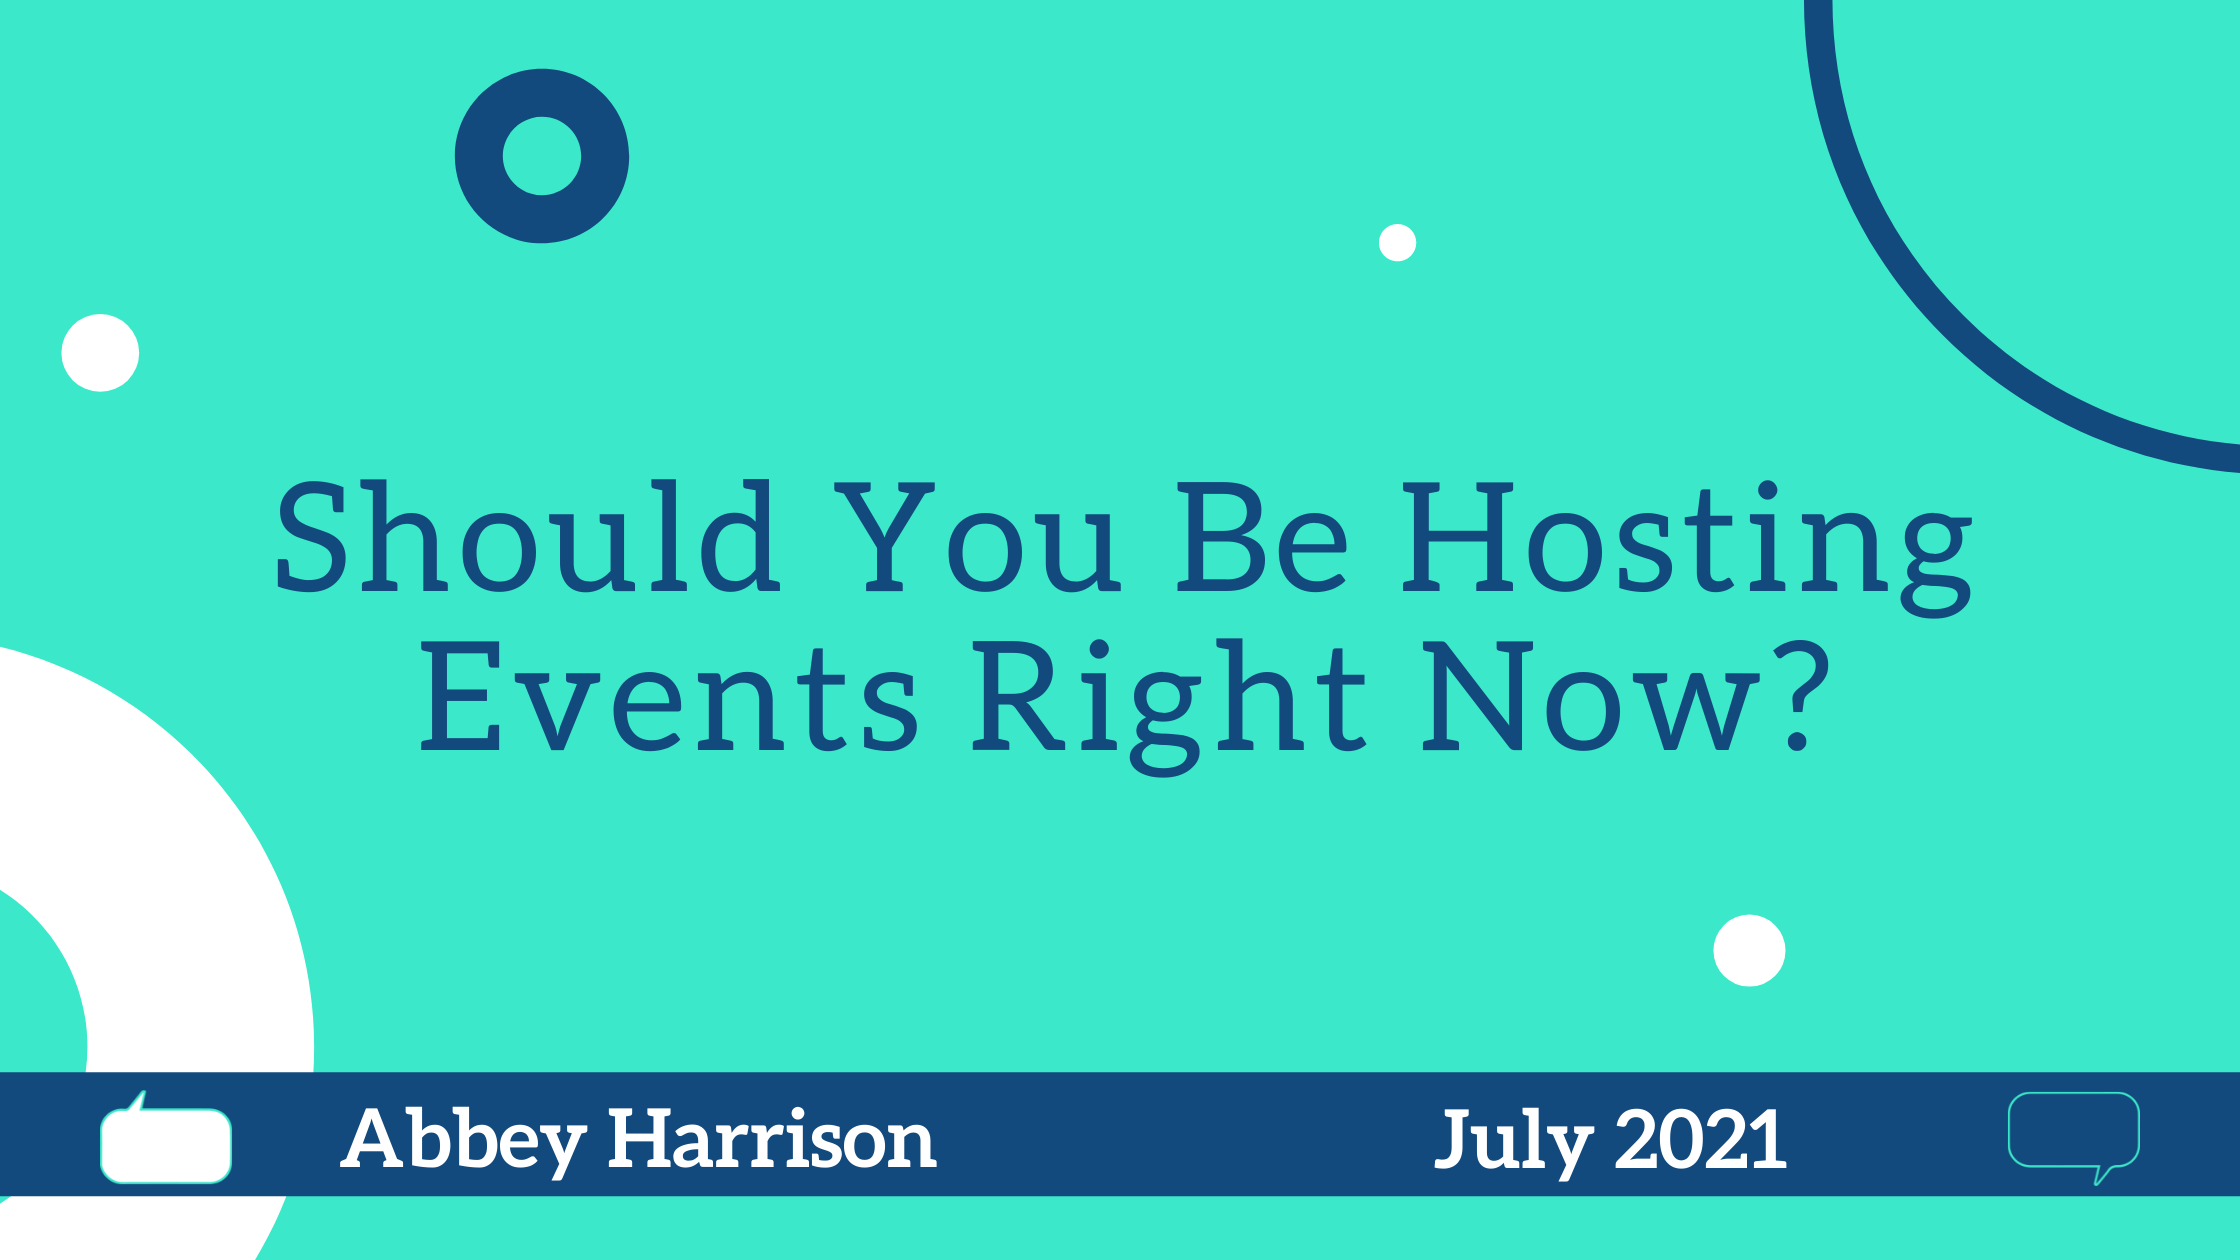 Should You Be Hosting Events Right Now?